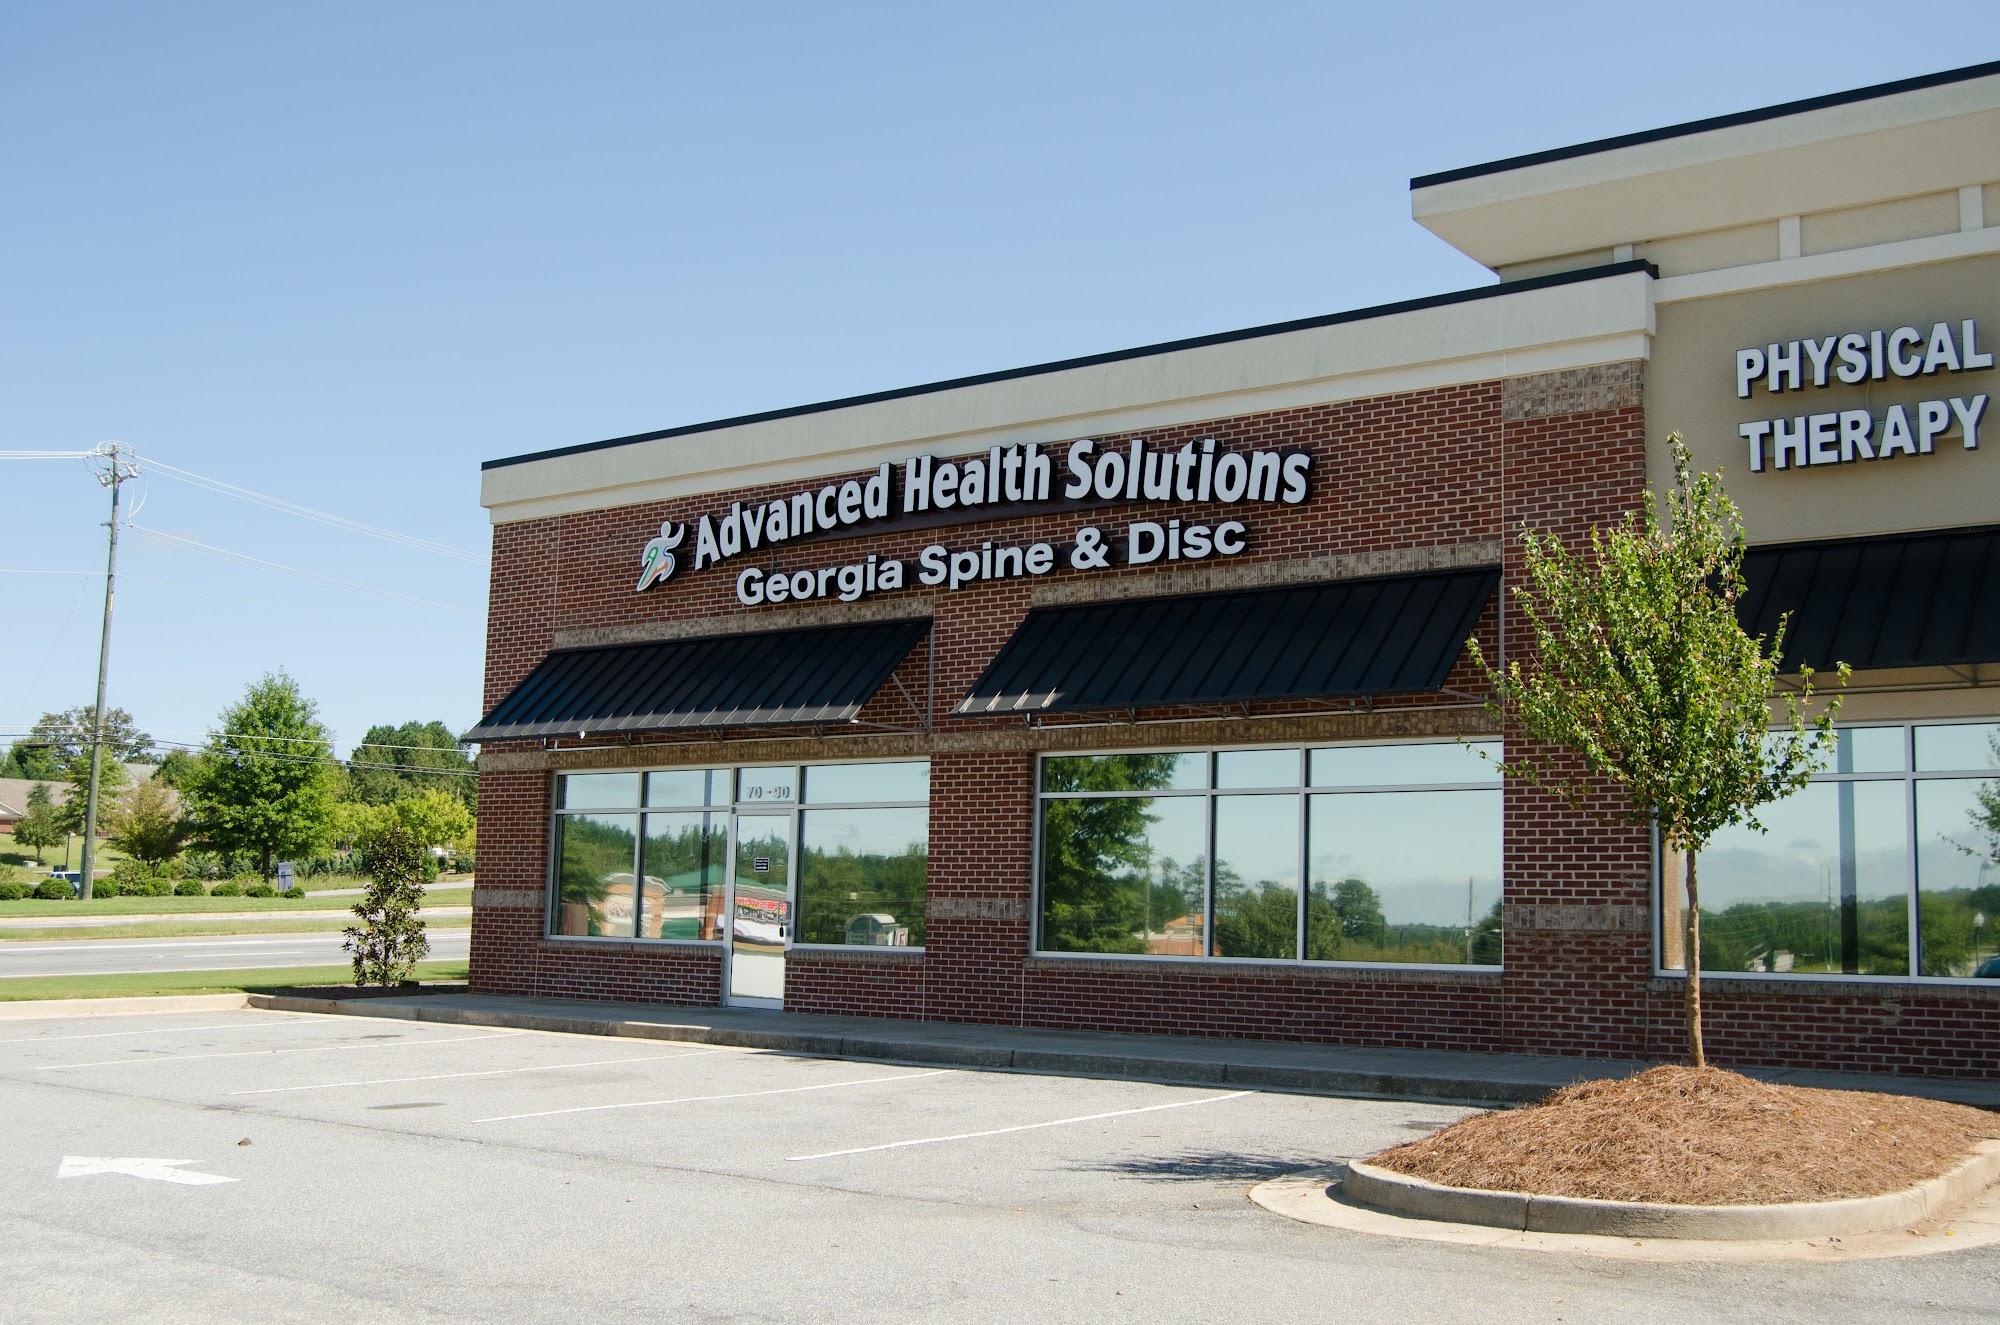 Advanced Health Solutions Georgia Spine and Disc